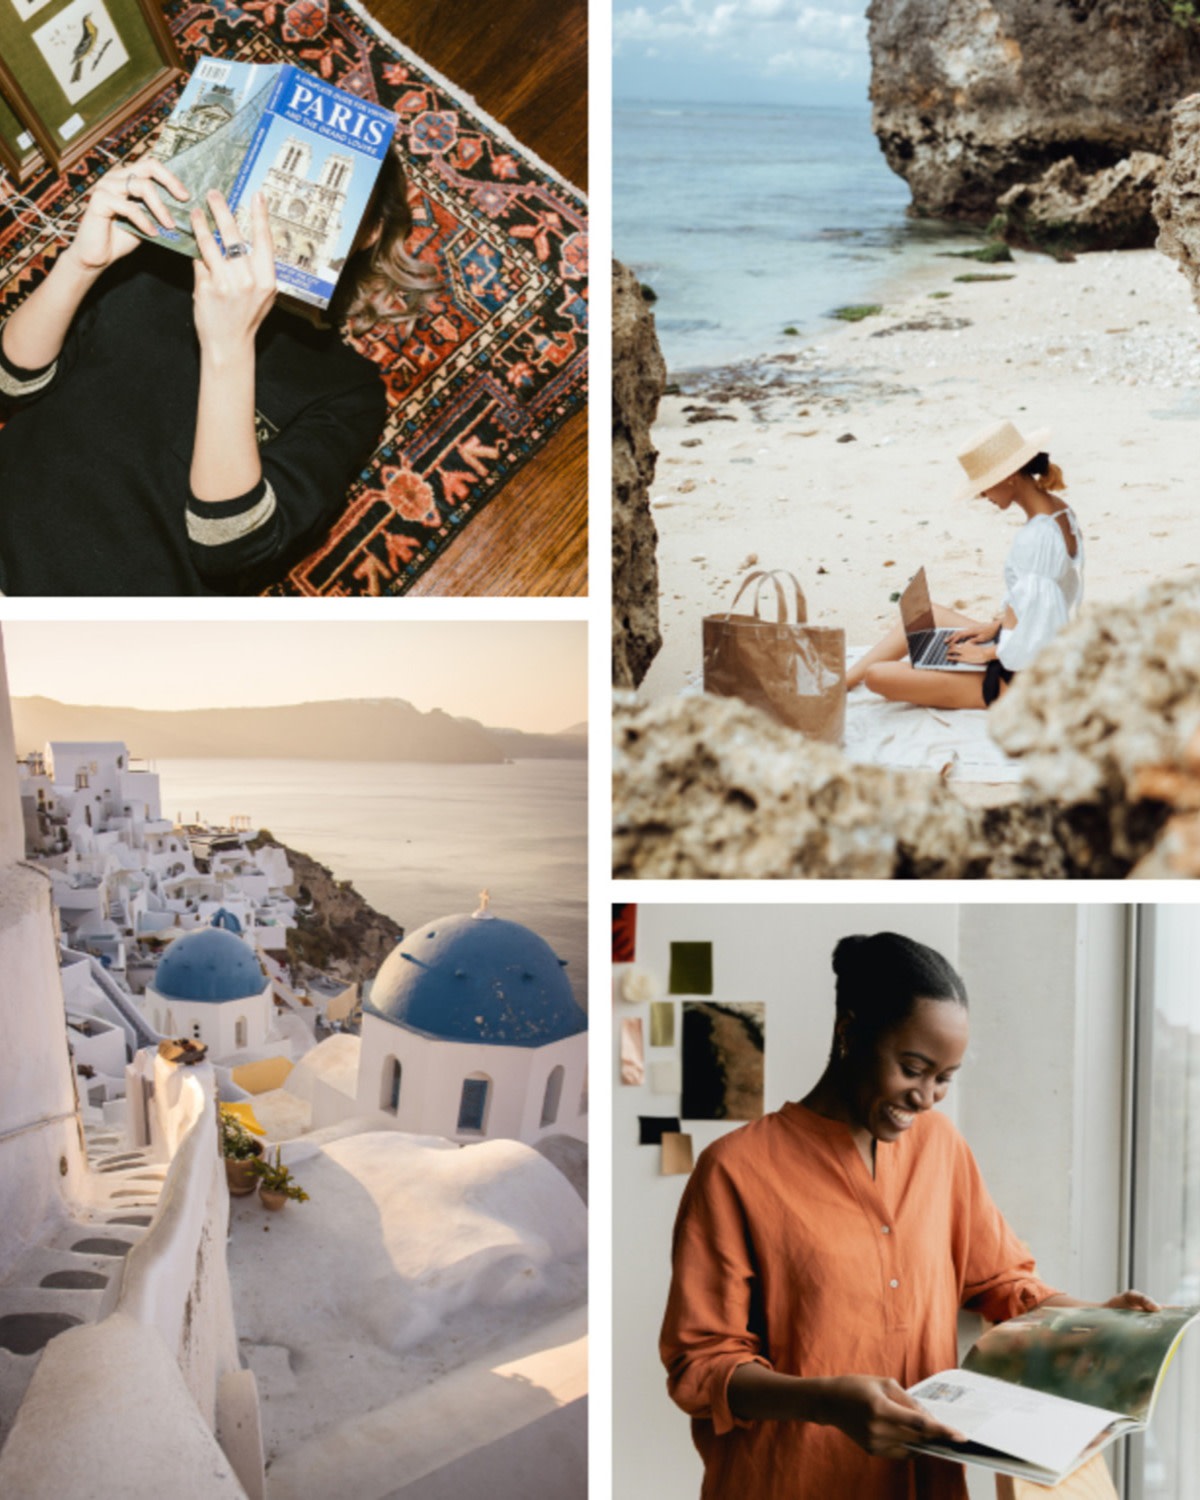 Grid of four images: a person lying on a rug reading a book about Paris, their face hidden behind the cover; a woman with a picnic on a secluded rocky beach, a dense seaside town with whitewashed buildings capped with blue domes, and a woman smiling and flipping through a travel magazine near a bright window.